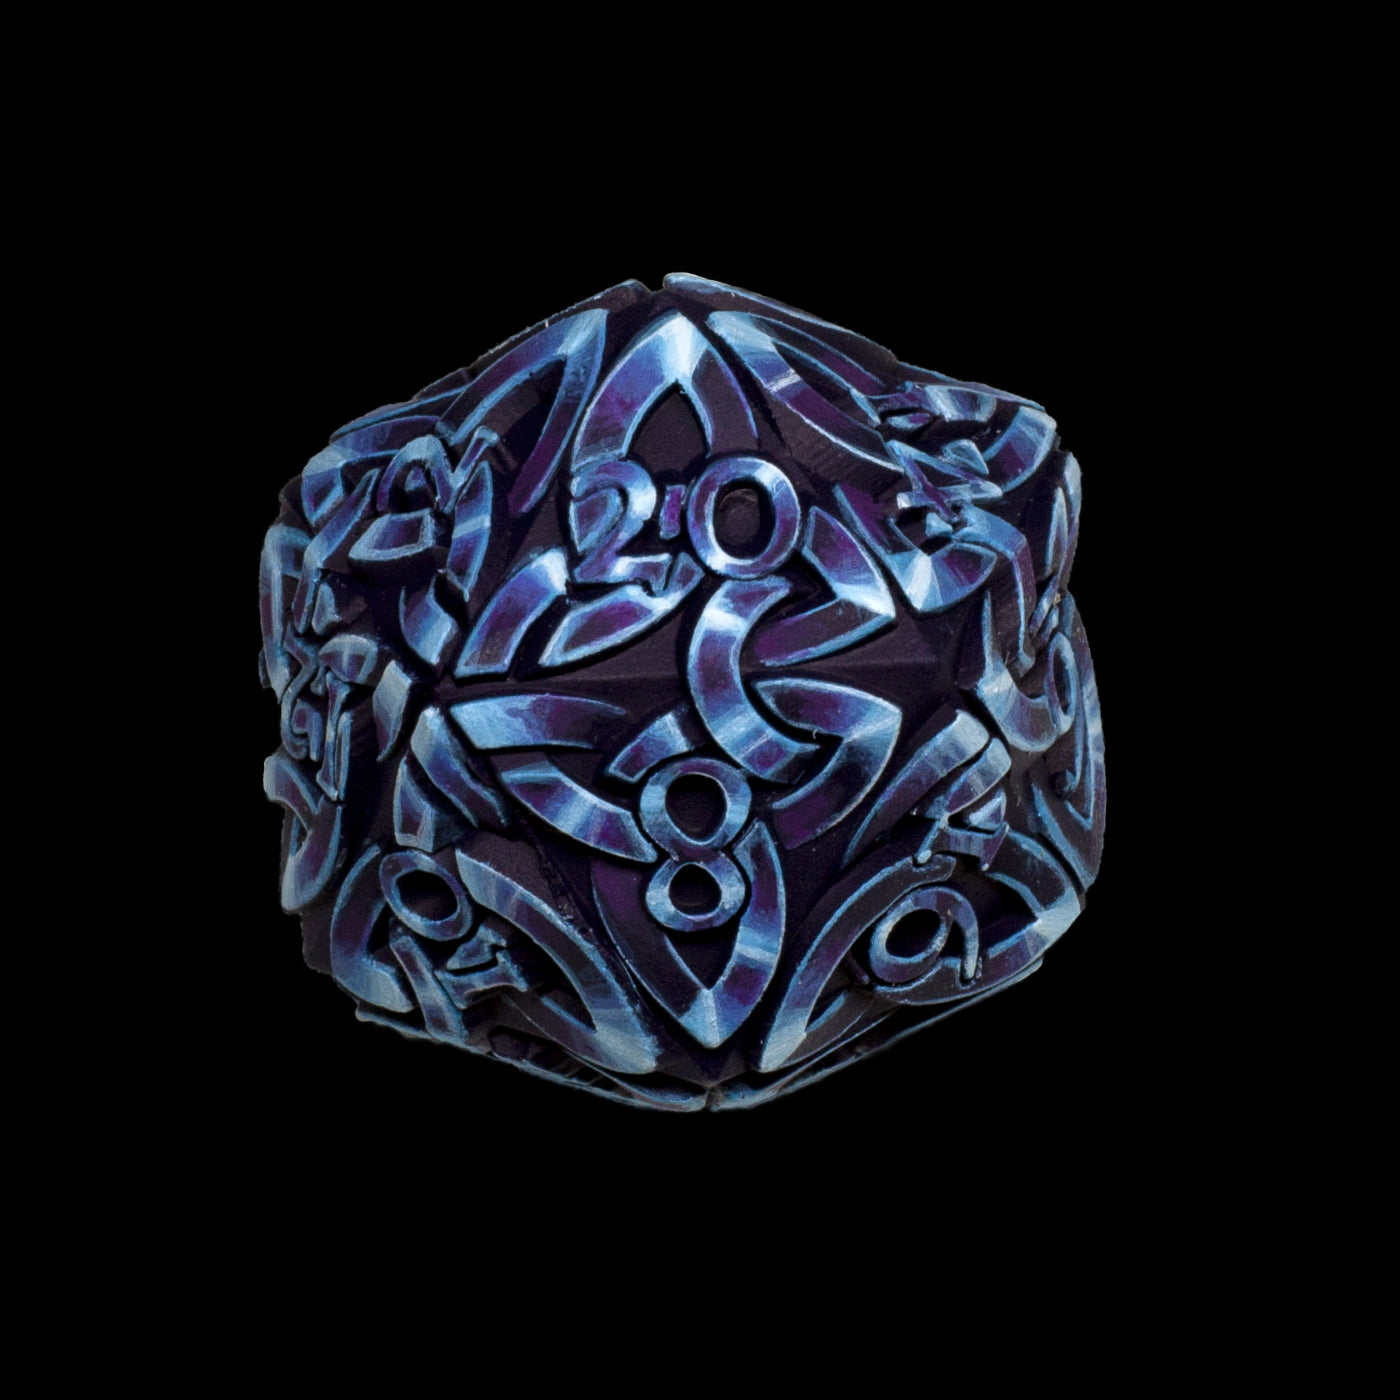 Hand-painted Dice